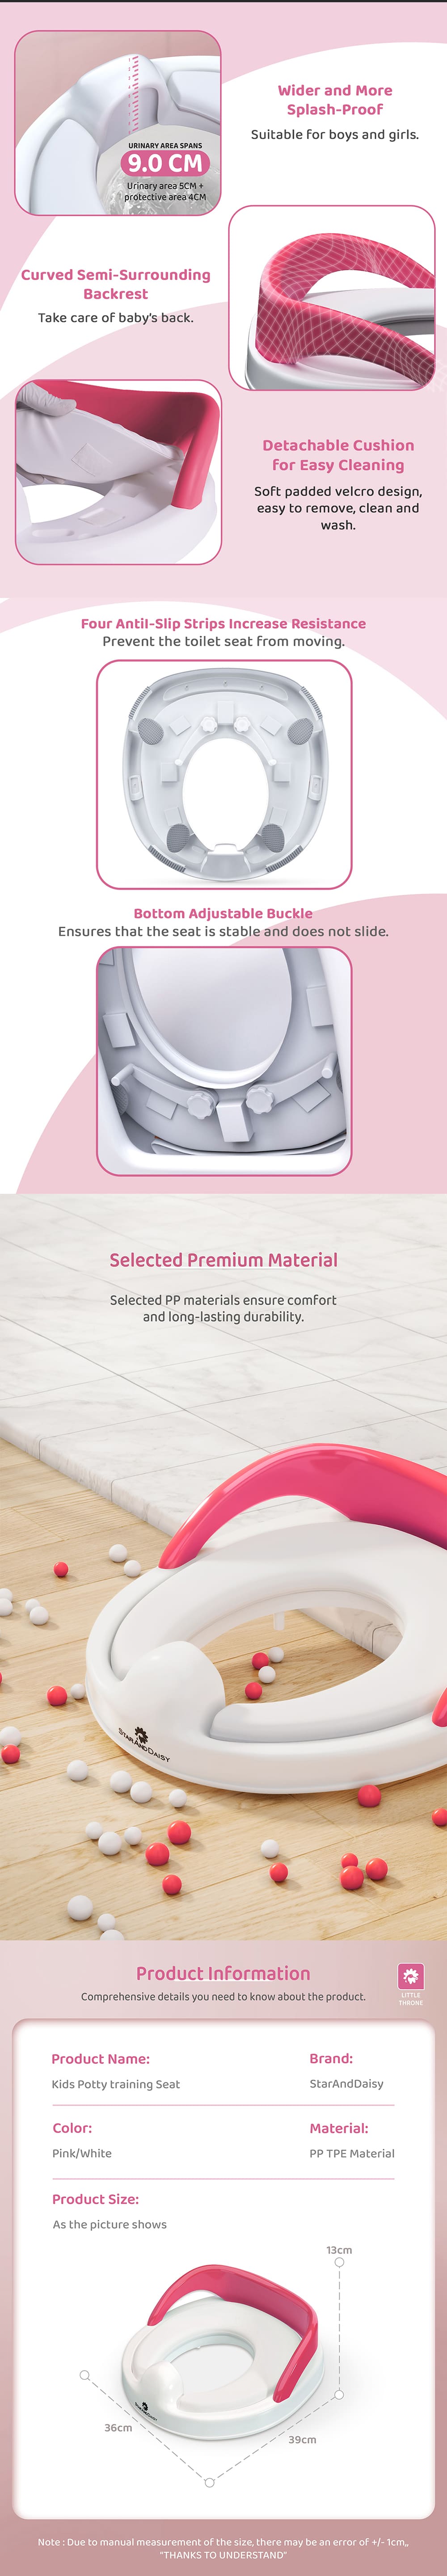 Specification of Potty Training Seat